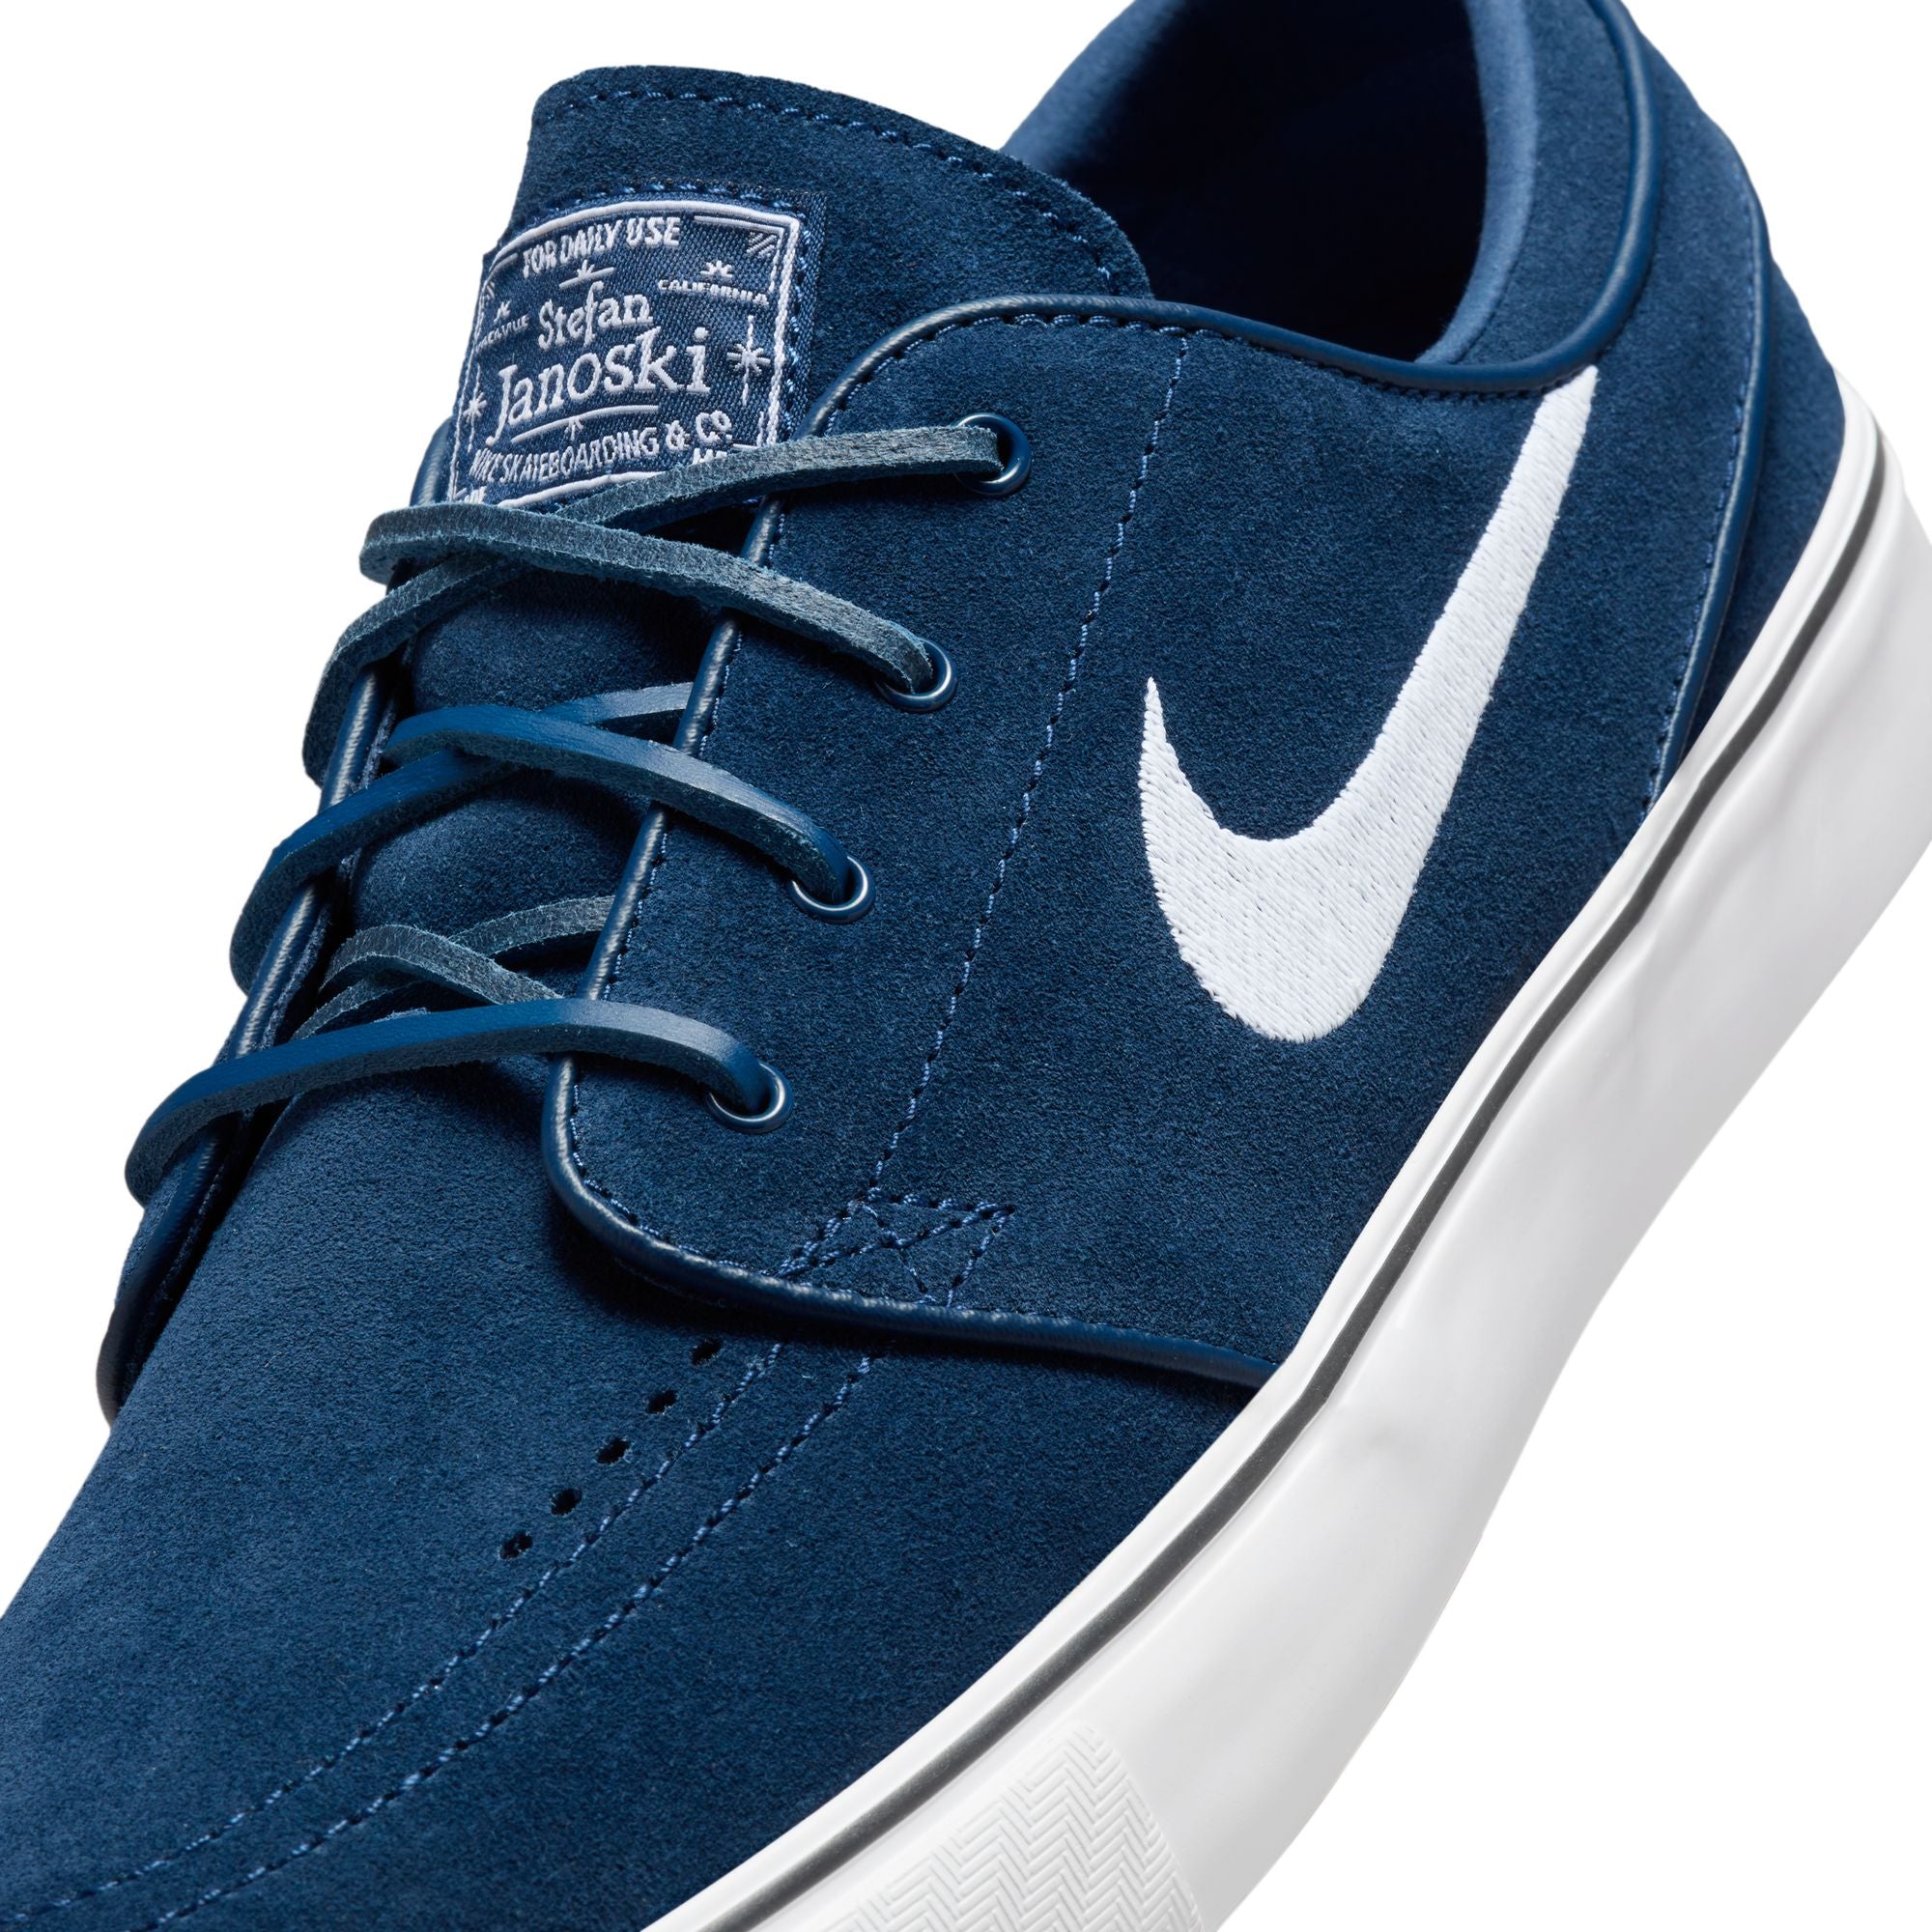 Dark blue nike low top skate shoes with a white nike swoosh logo and white sole. Free uk shipping over £50